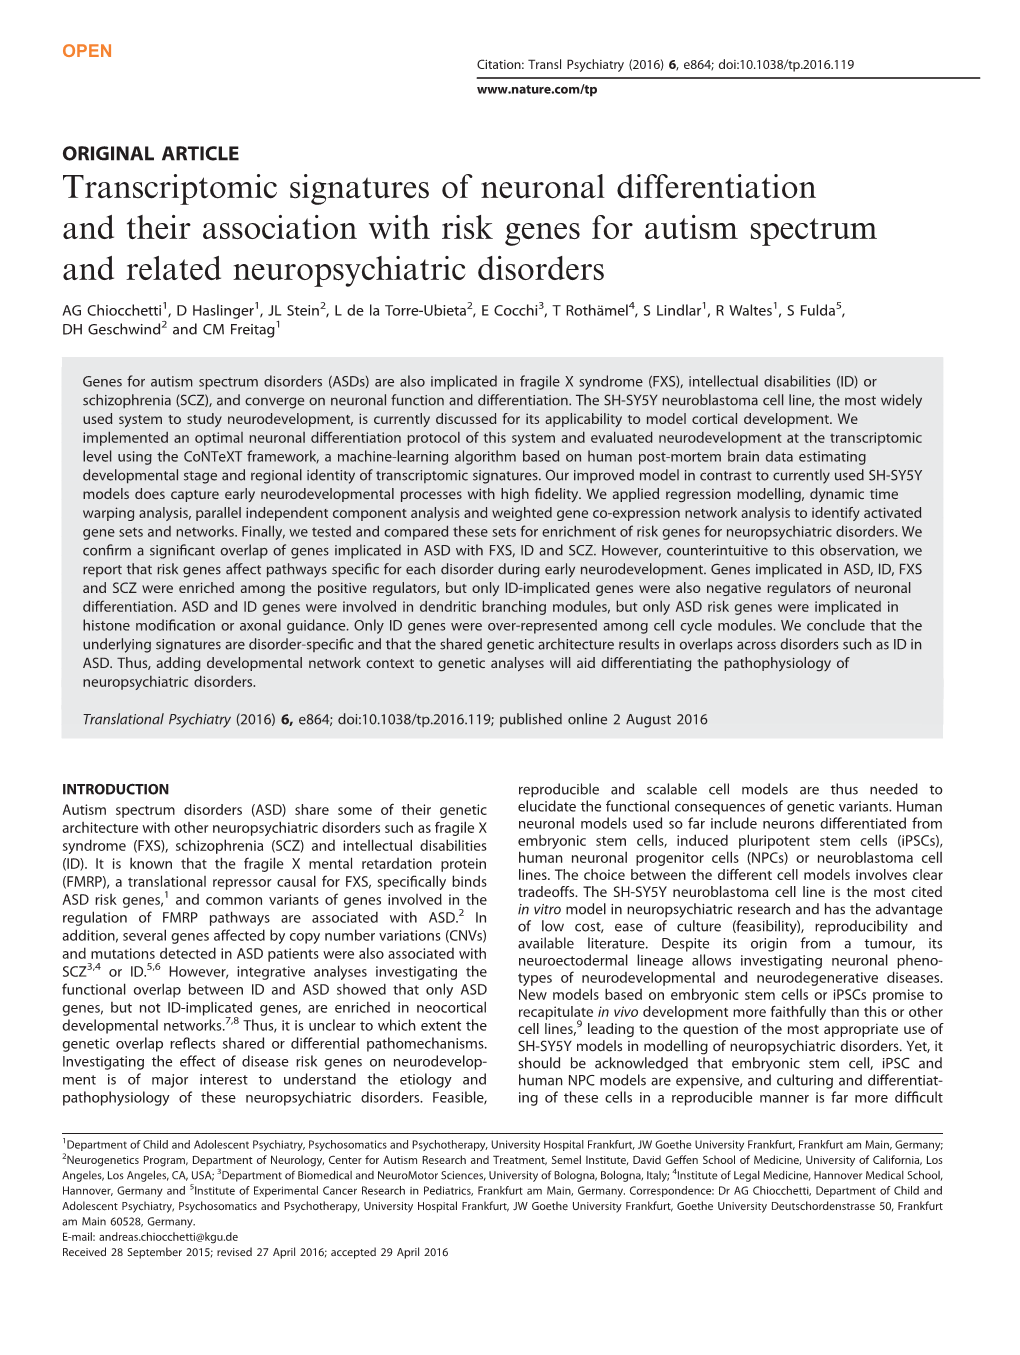 Transcriptomic Signatures of Neuronal Differentiation and Their Association with Risk Genes for Autism Spectrum and Related Neuropsychiatric Disorders